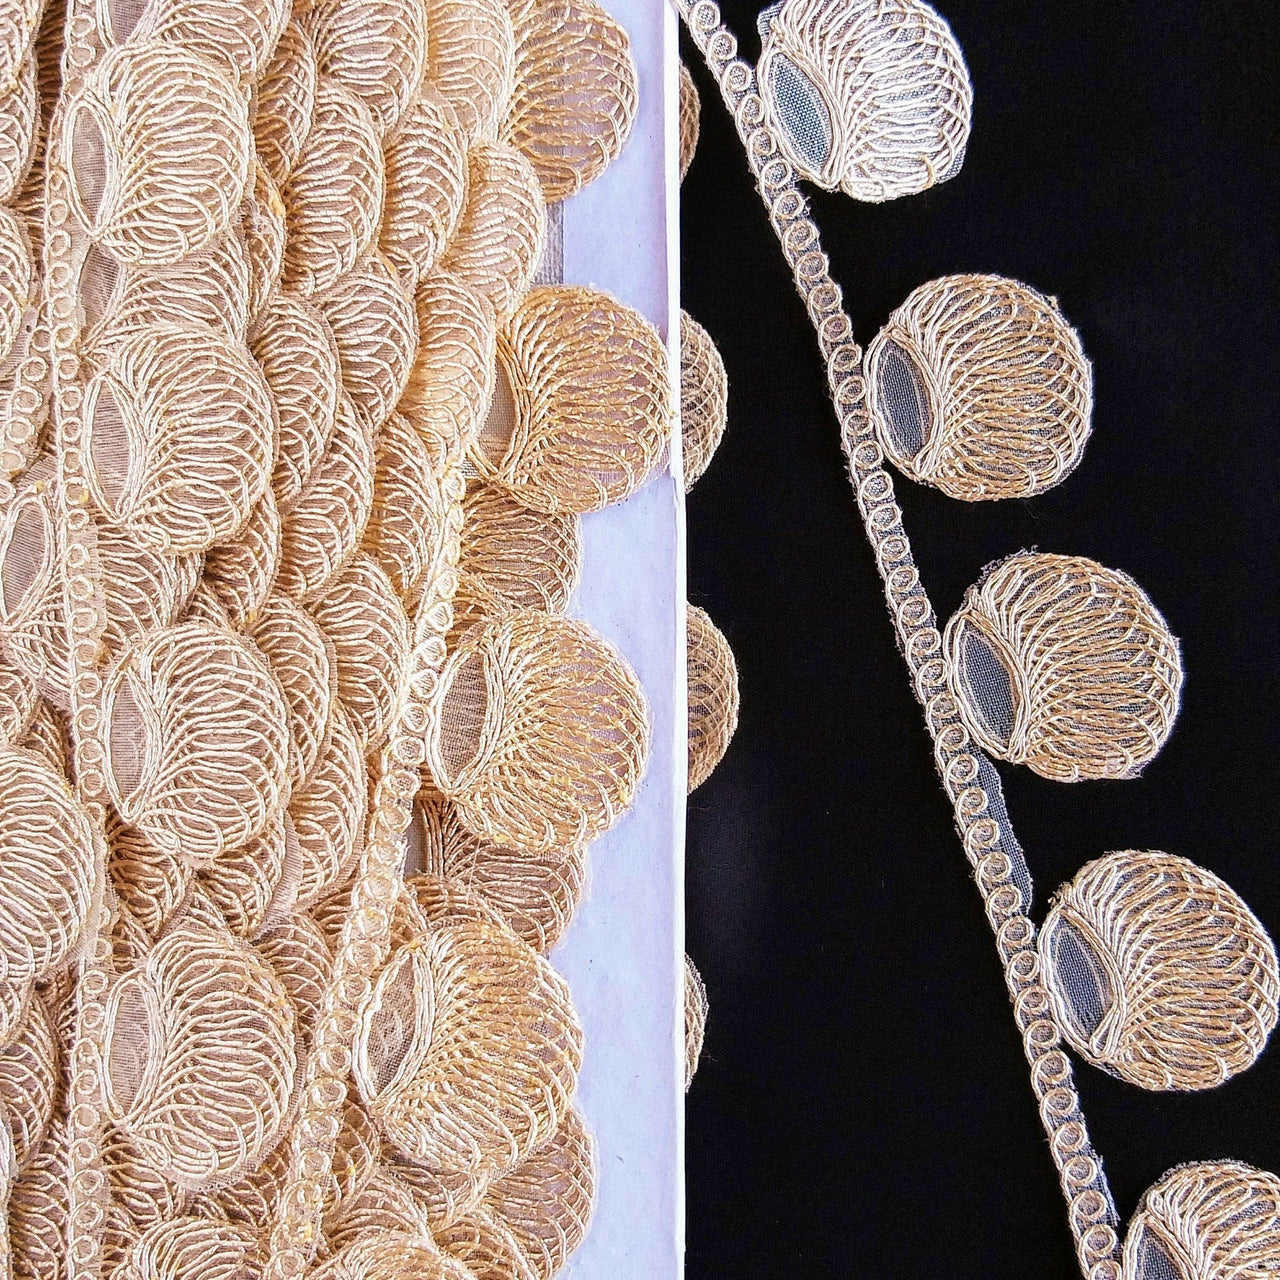 Gold Shimmer Thread Embroidered Circle Design Thread Trim, Fringe Trim, Approx. 34mm wide